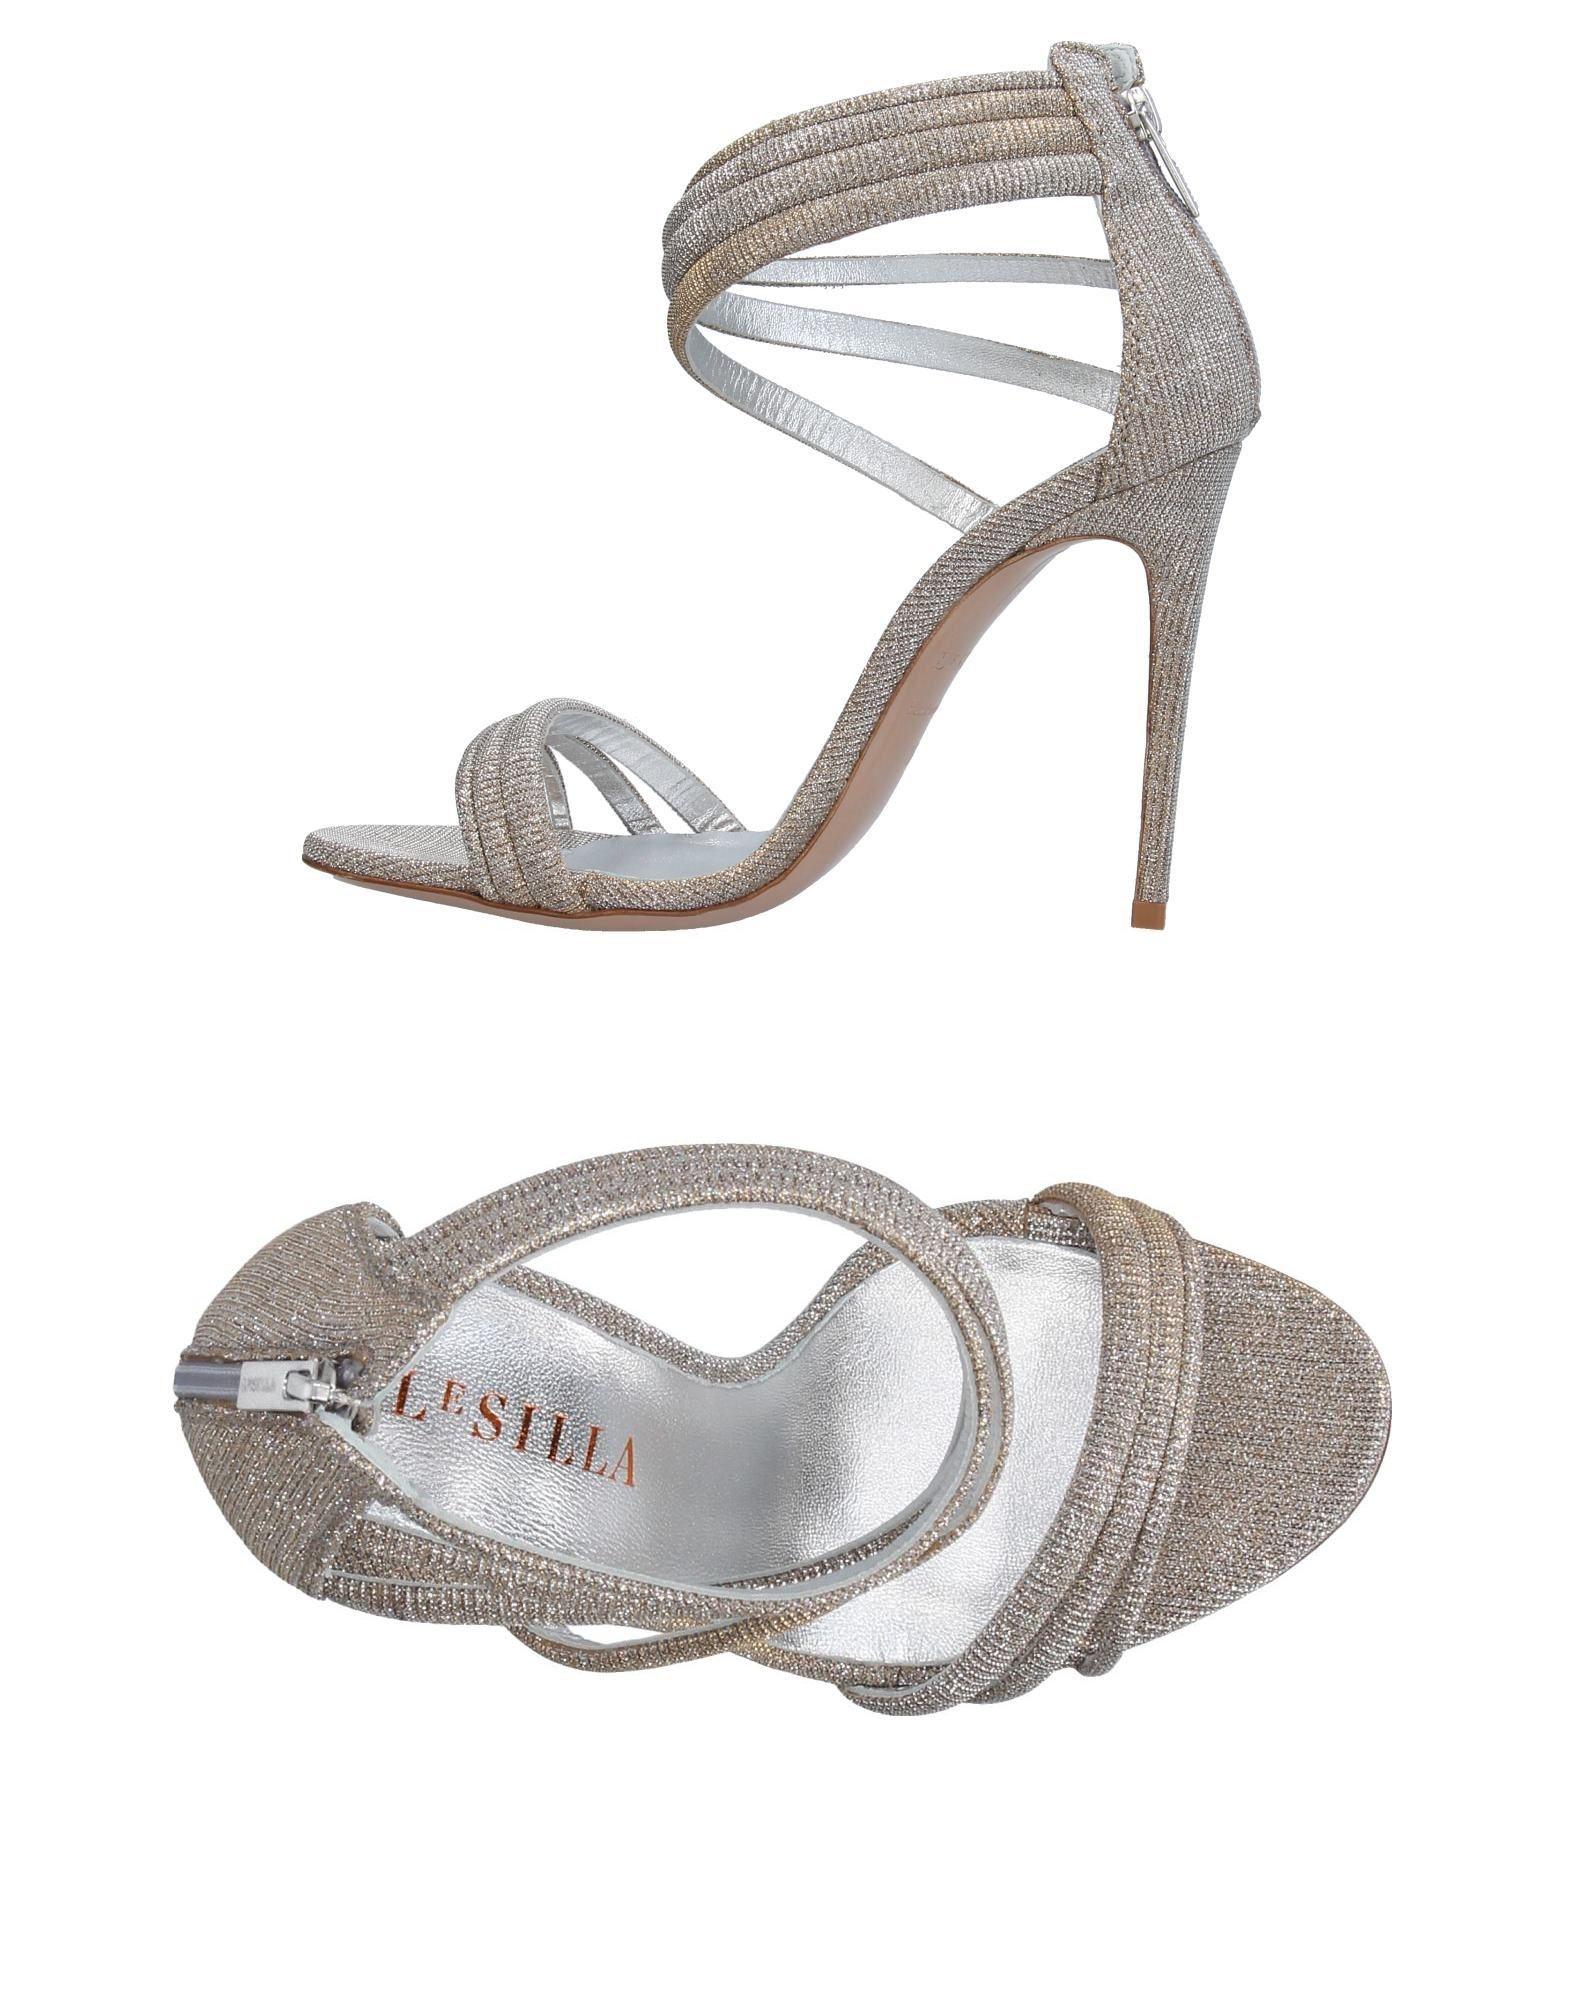 Le Silla Leather Sandals in Silver (Metallic) - Lyst